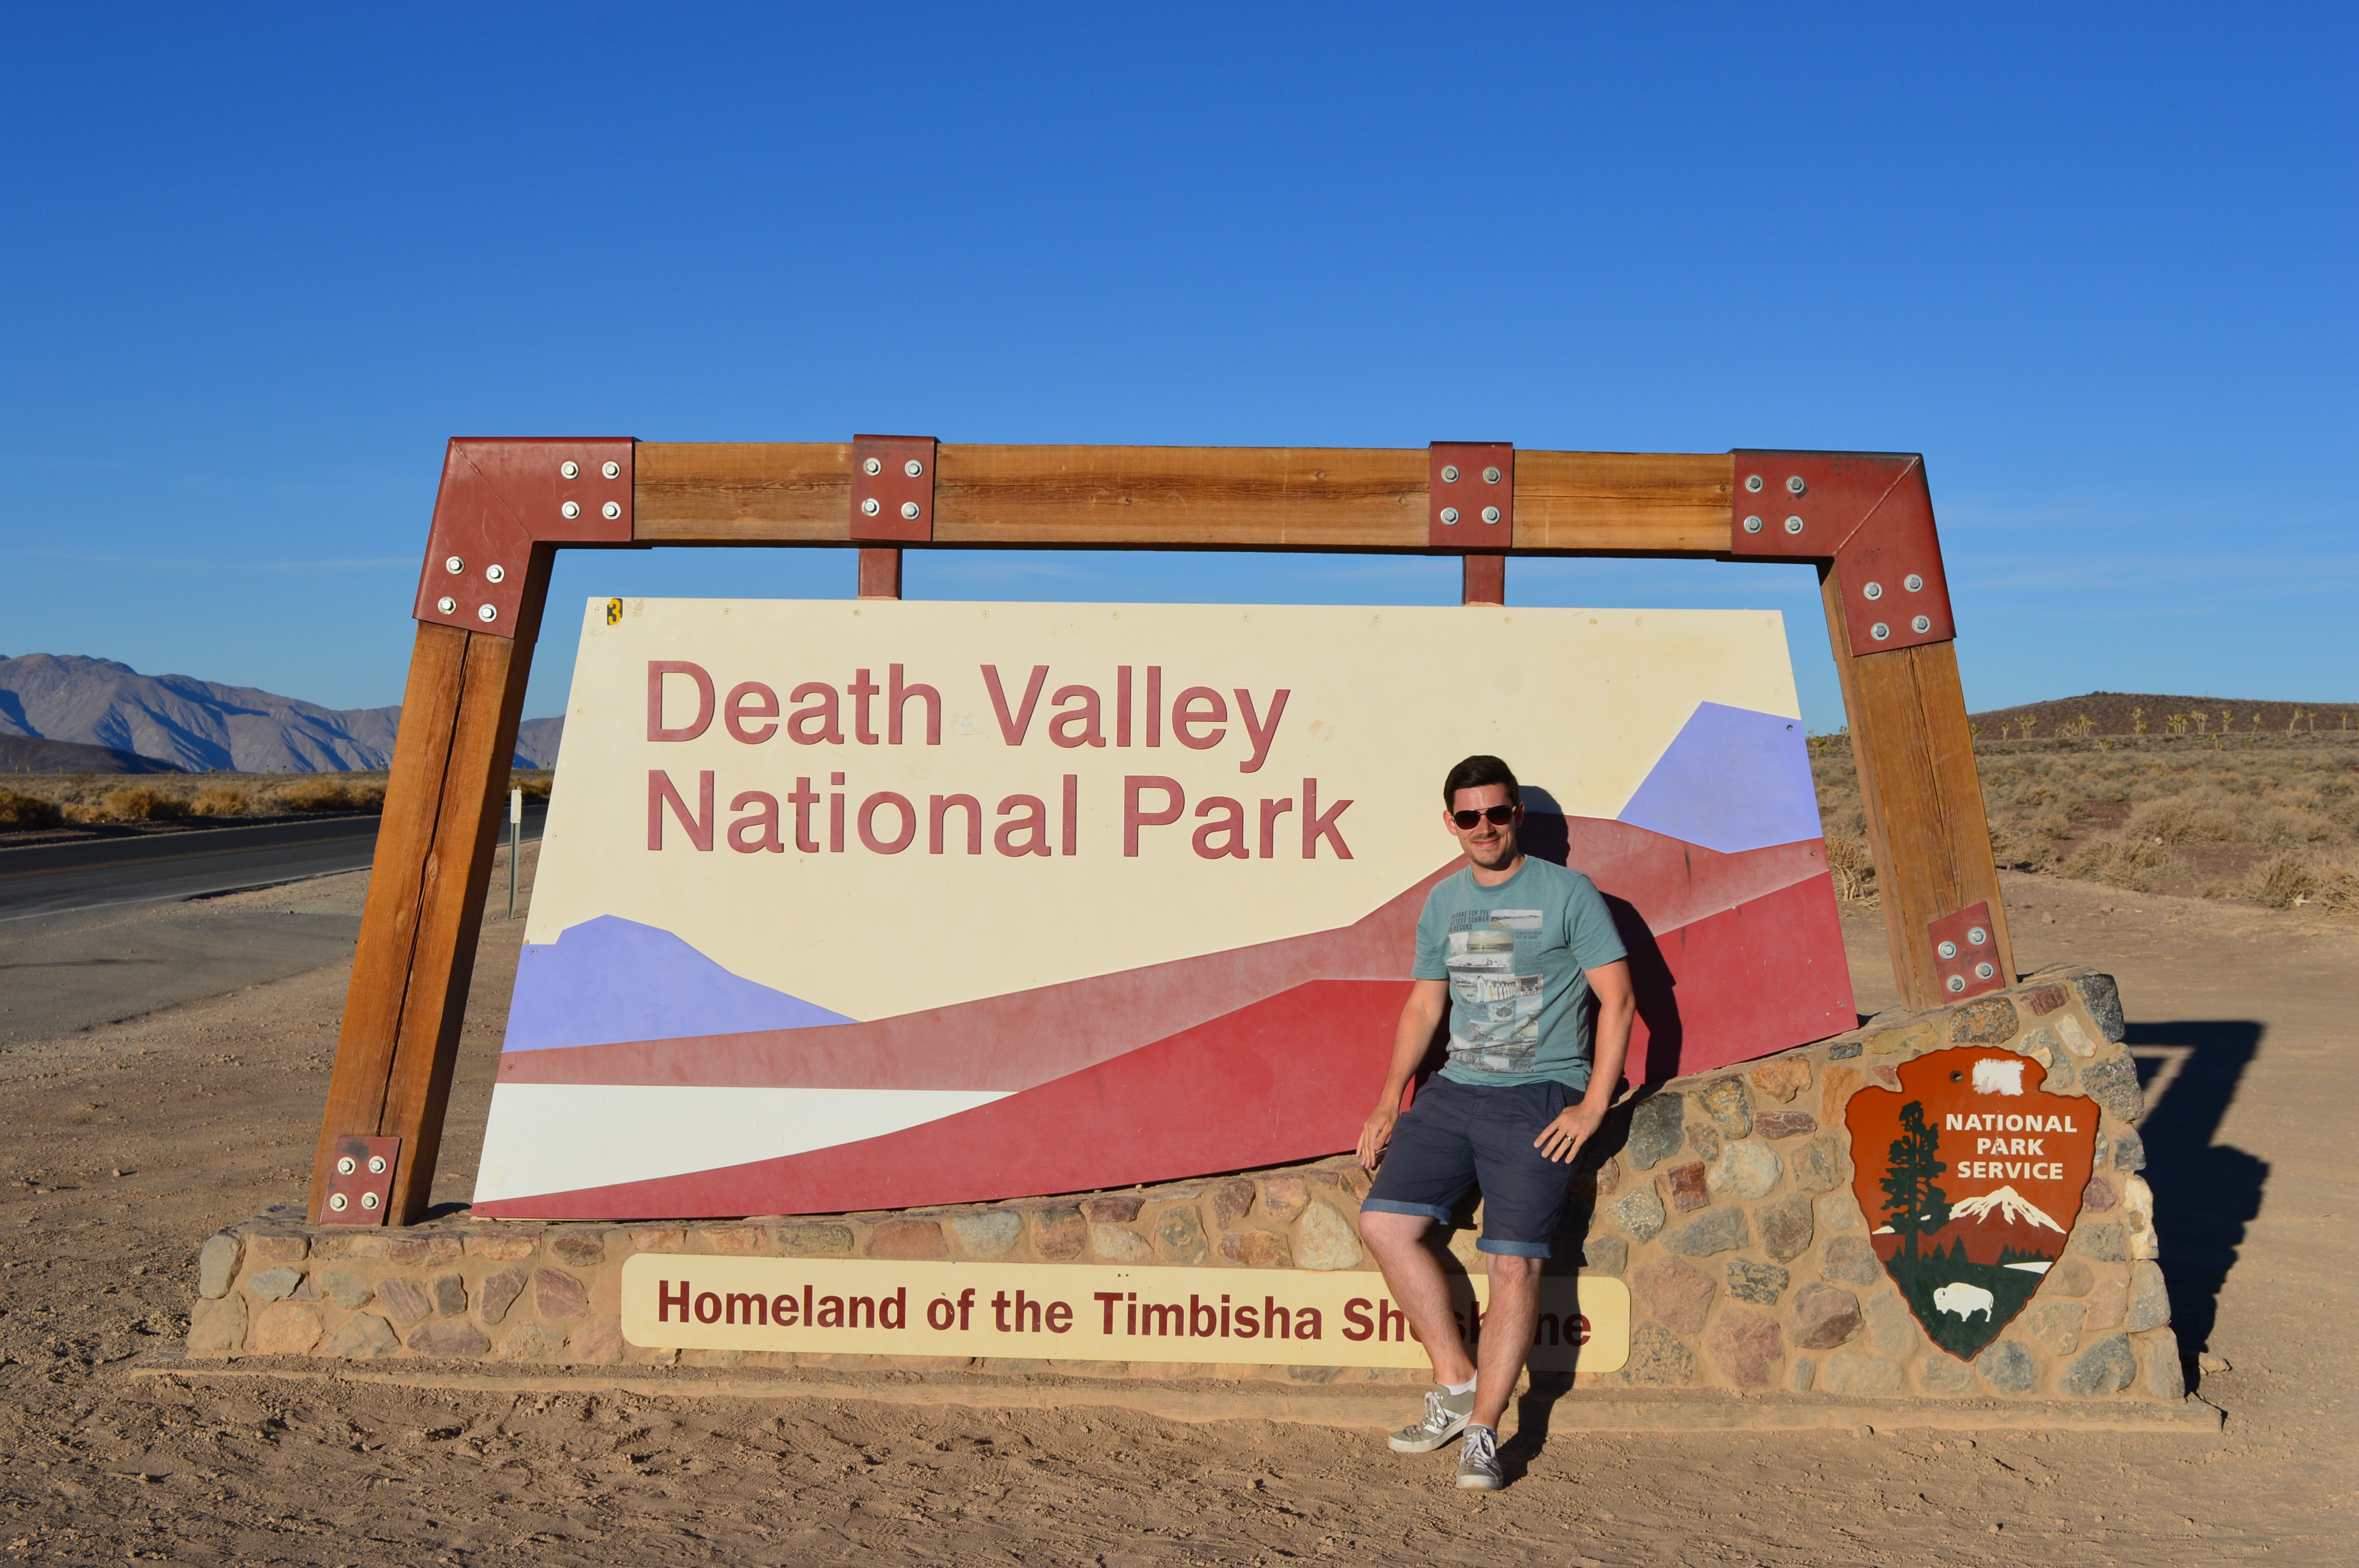 Welcome to Death Valley National Park